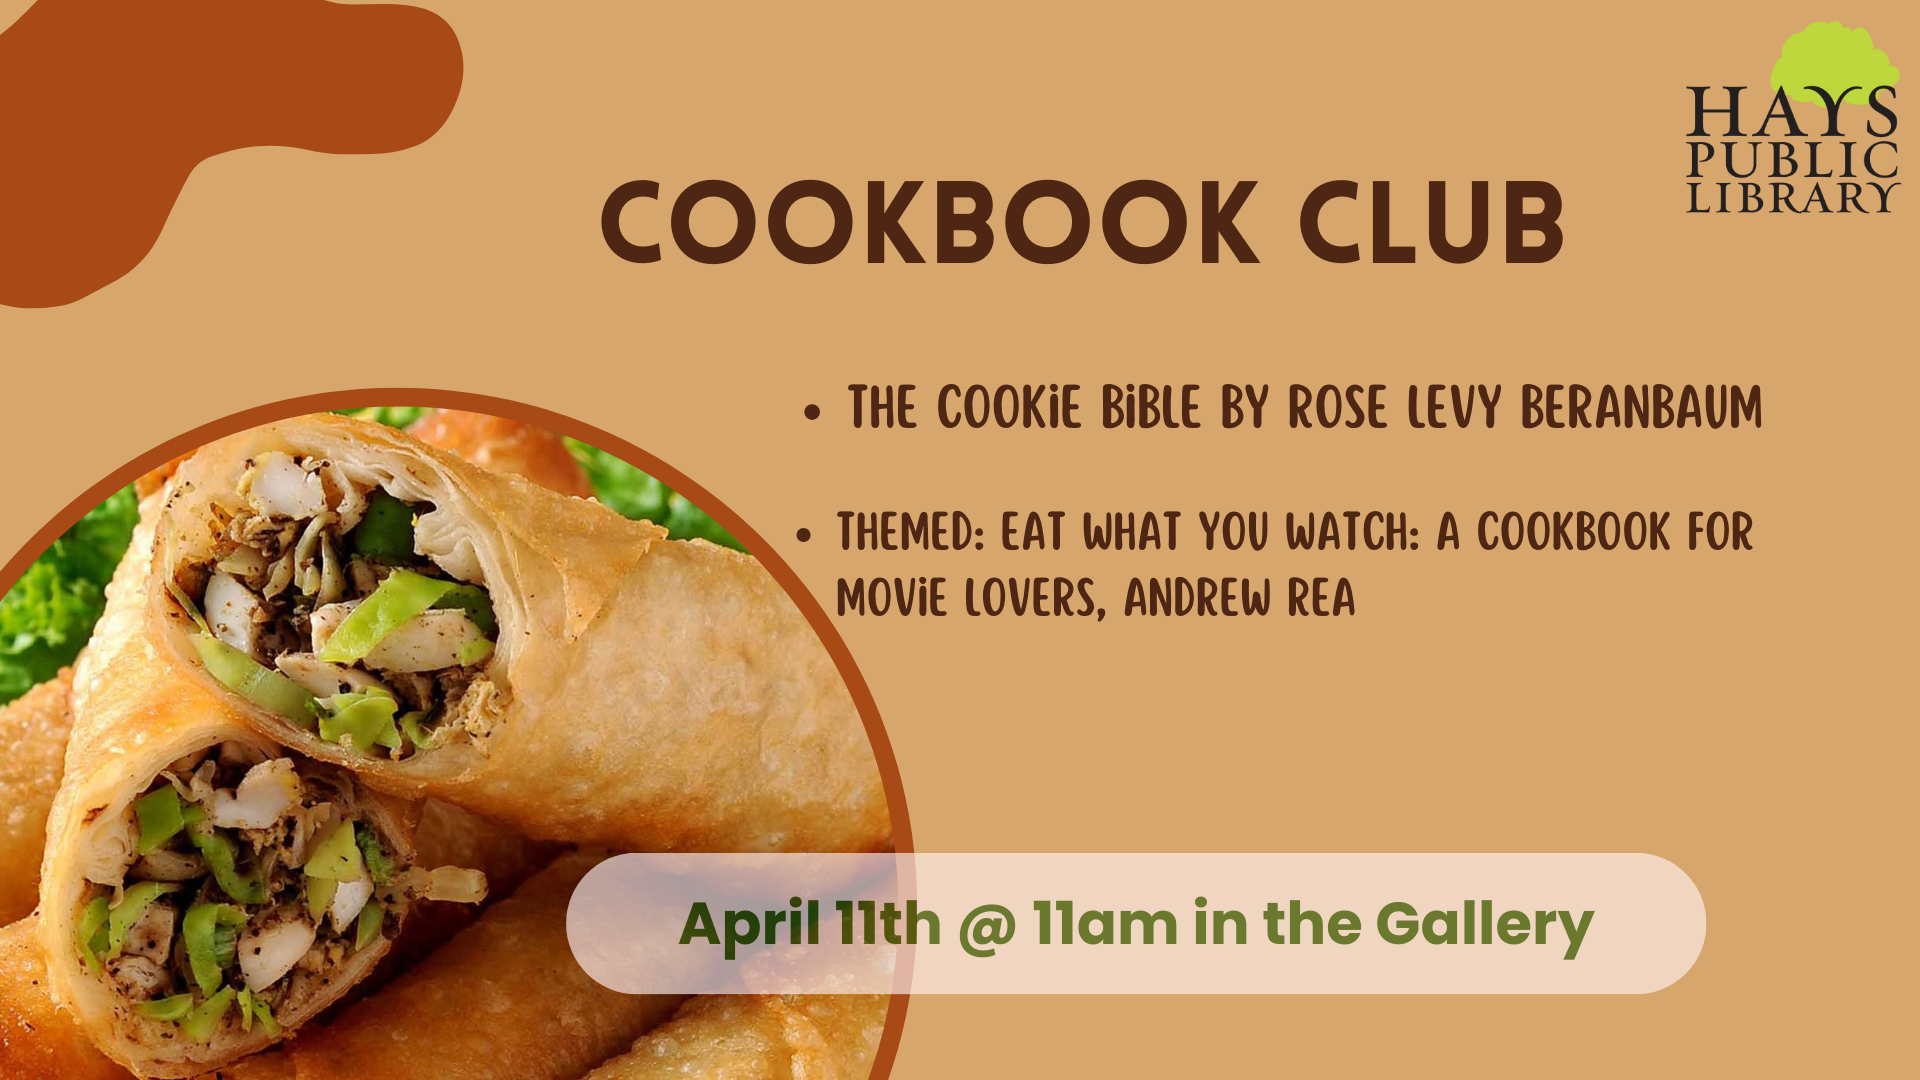 Cookbook Club.  Book selections are The Cookie Bible by Rose Levy Beranbaum and Eat What you Watch by Andrew Rea.  